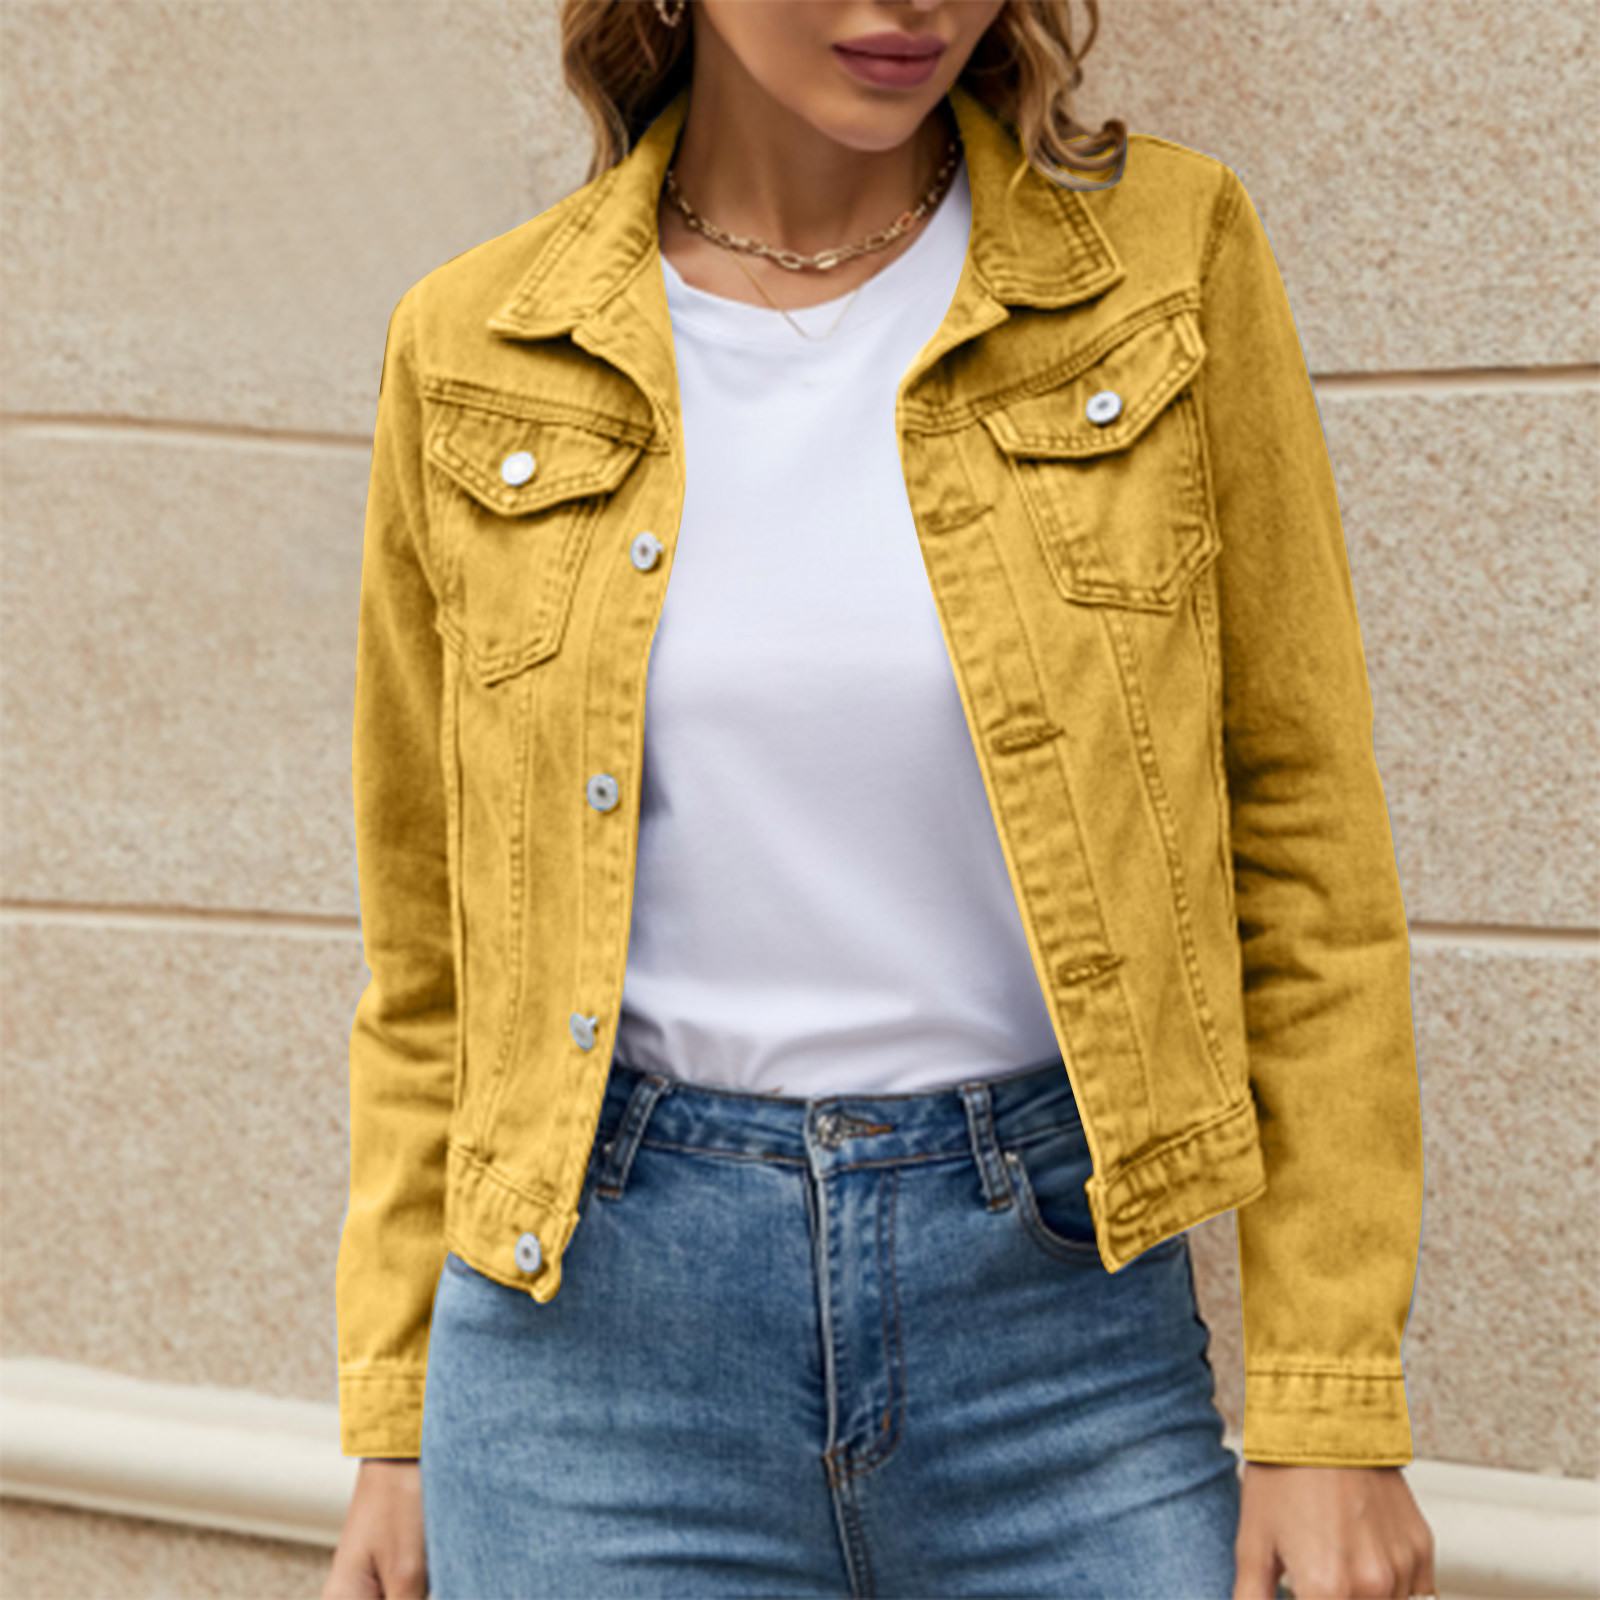 iOPQO womens sweaters Women's Basic Solid Color Button Down Denim Cotton Jacket With Pockets Denim Jacket Coat Women's Denim Jackets Yellow M - image 5 of 8